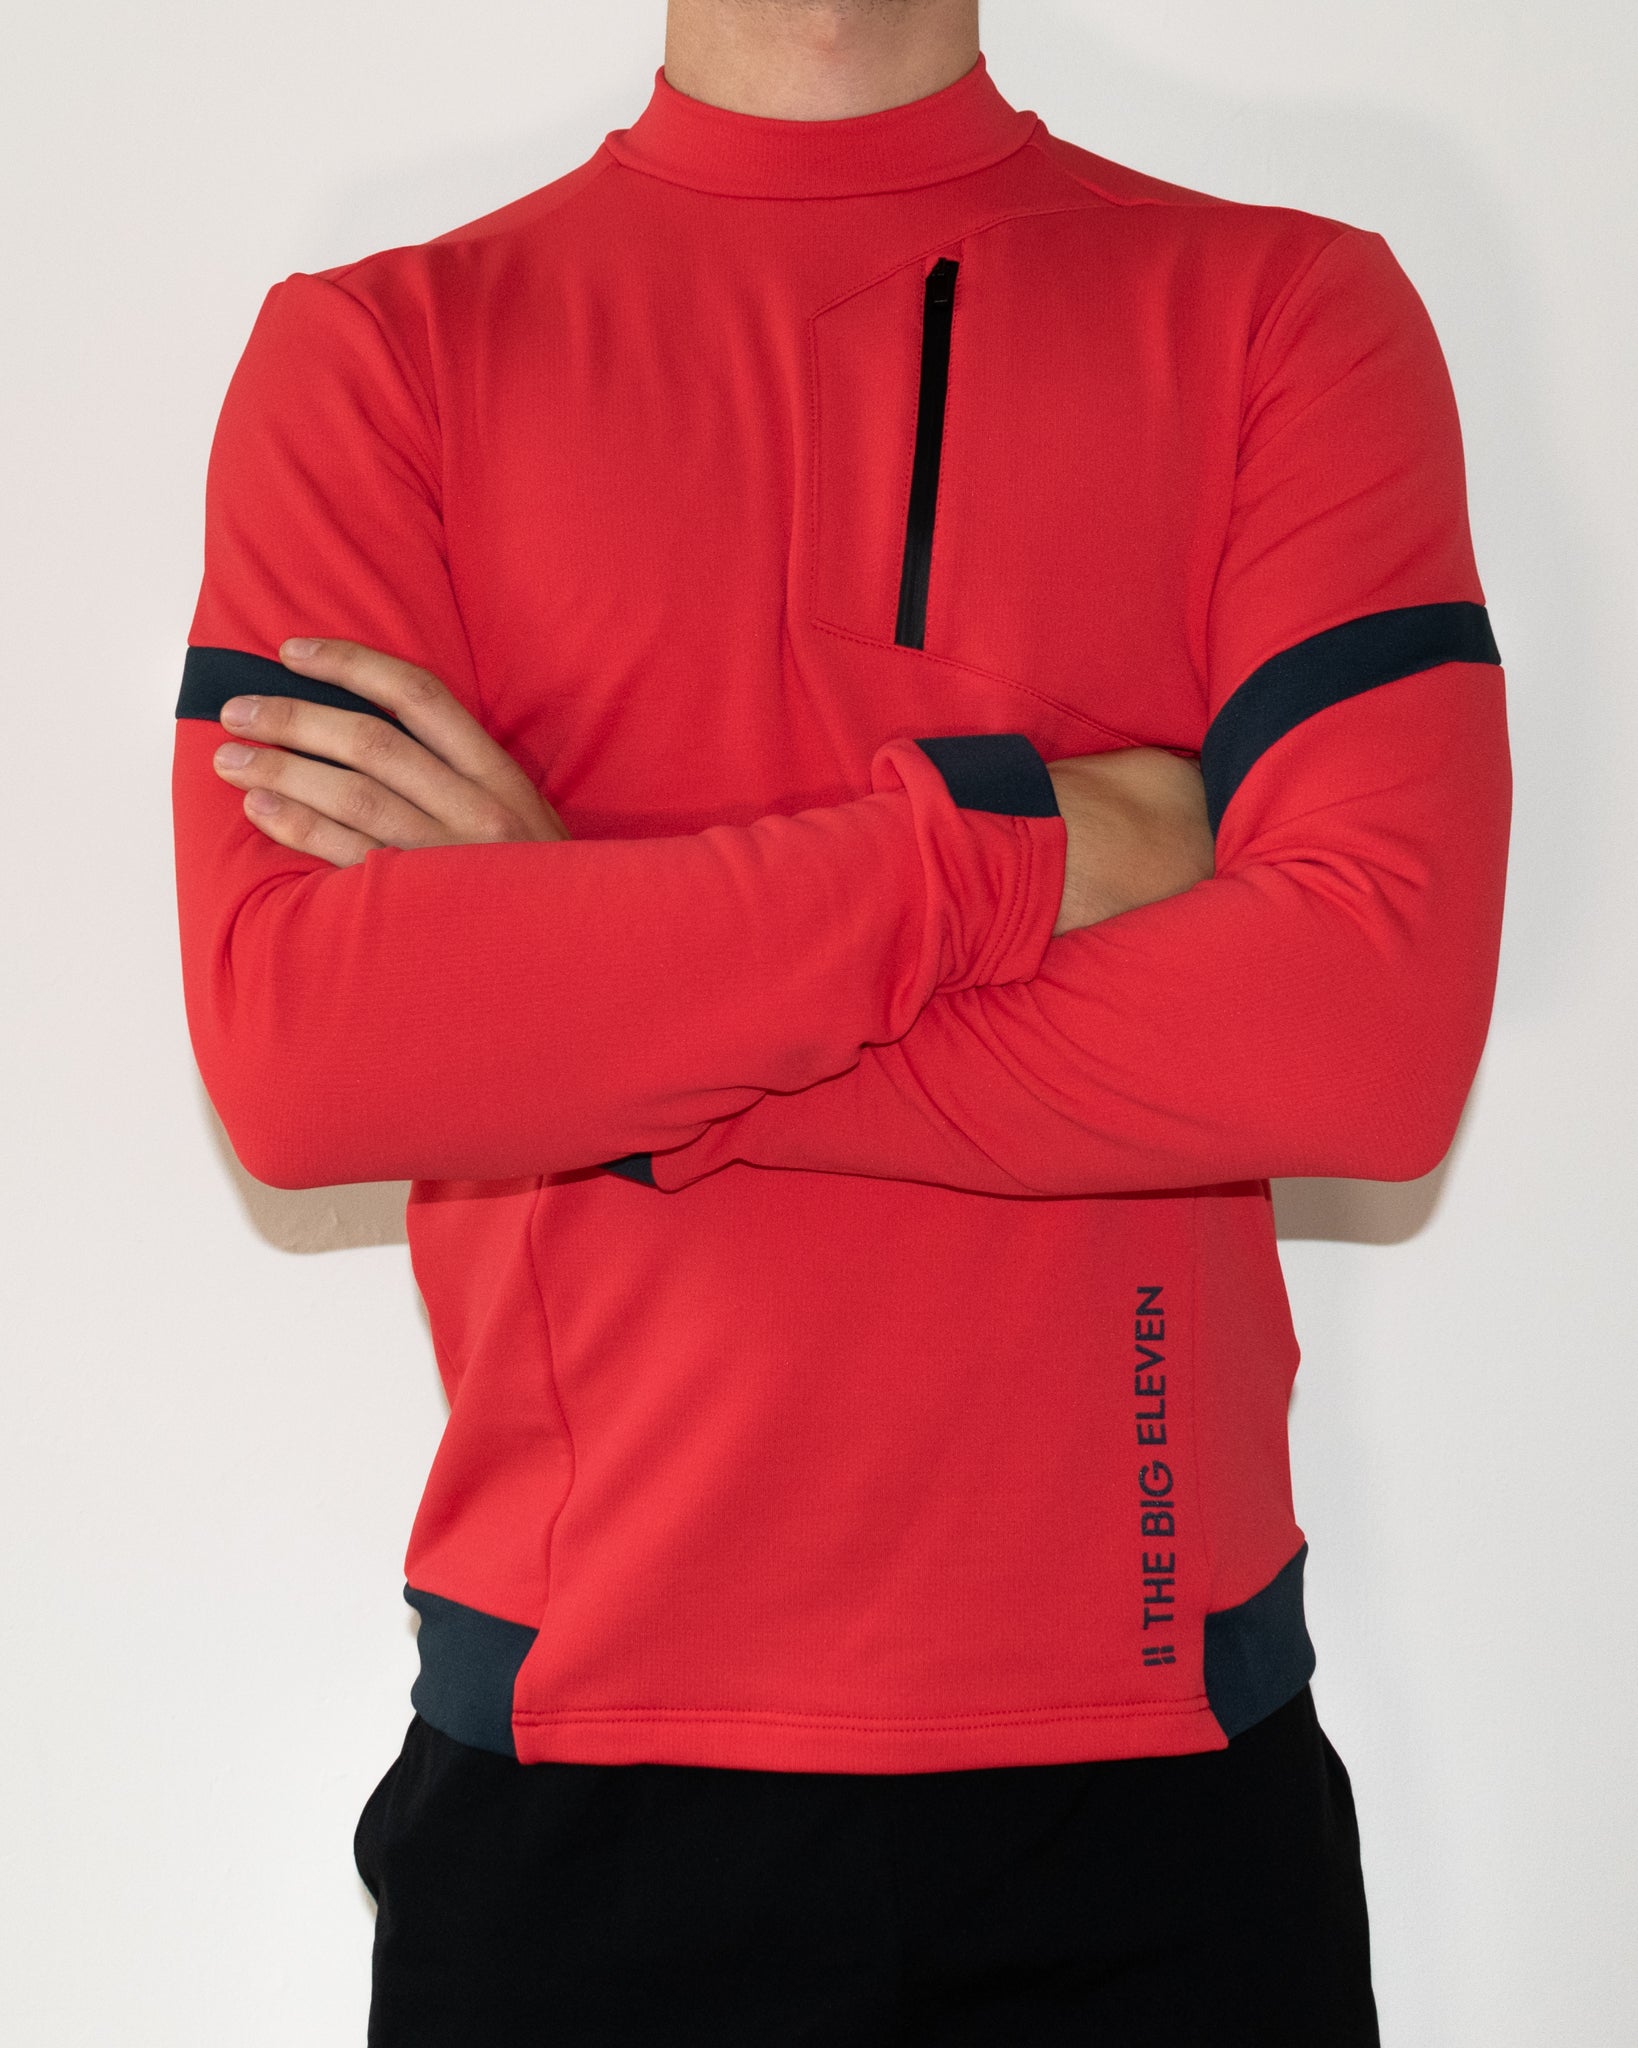 NOOK Red Plain activewear sweater